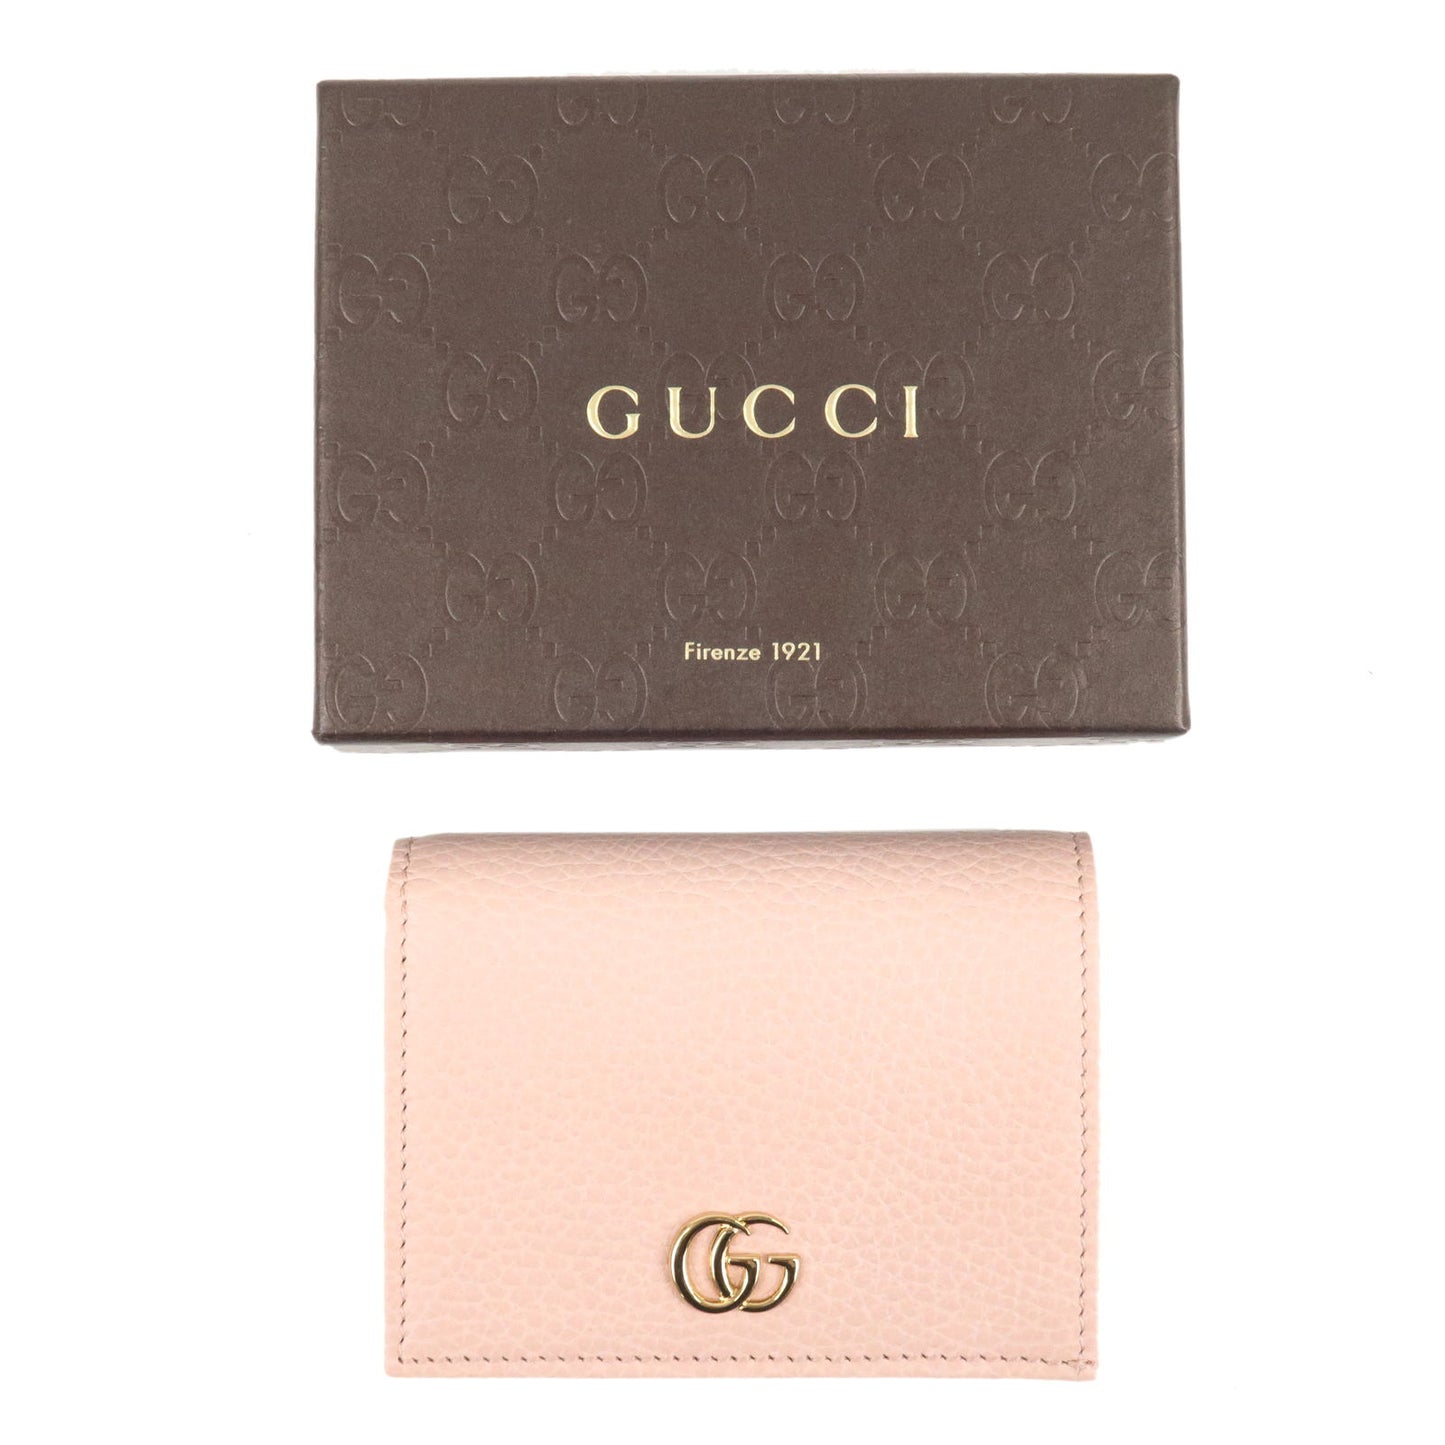 GUCCI Petit Marmont GG Marmont Leather Bi Fold Wallet Pink 456126